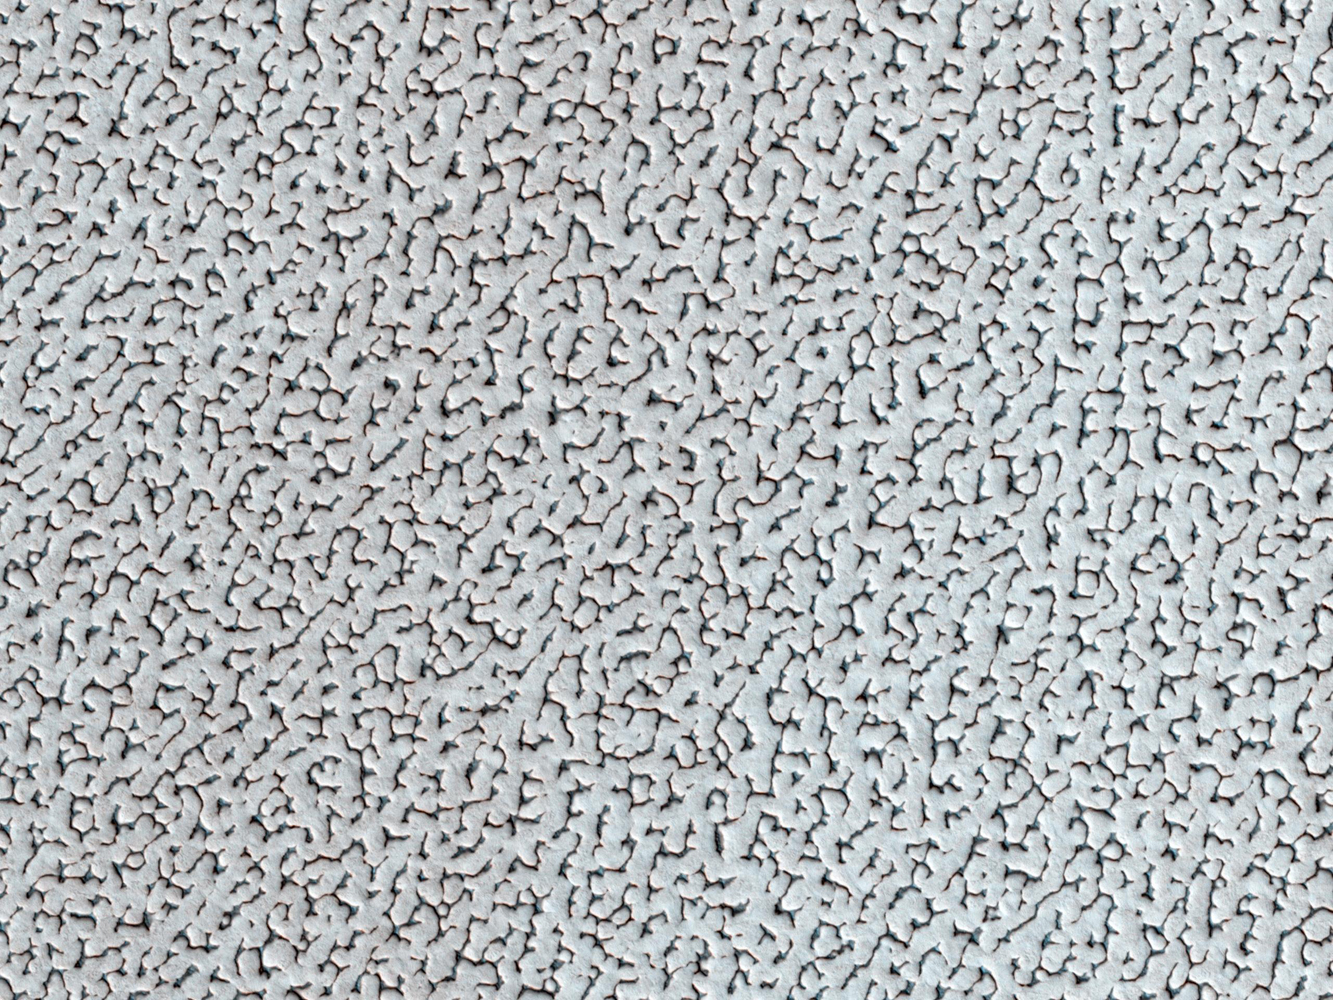 In this image released on March 5, 2014, the winter frosts are about to disappear on the North Pole of Mars, revealing the surface features of the ice. The ice cap is one of the smoothest, flattest places on Mars. This landscape continues for hundreds of kilometers in every direction with this same repeating pattern.